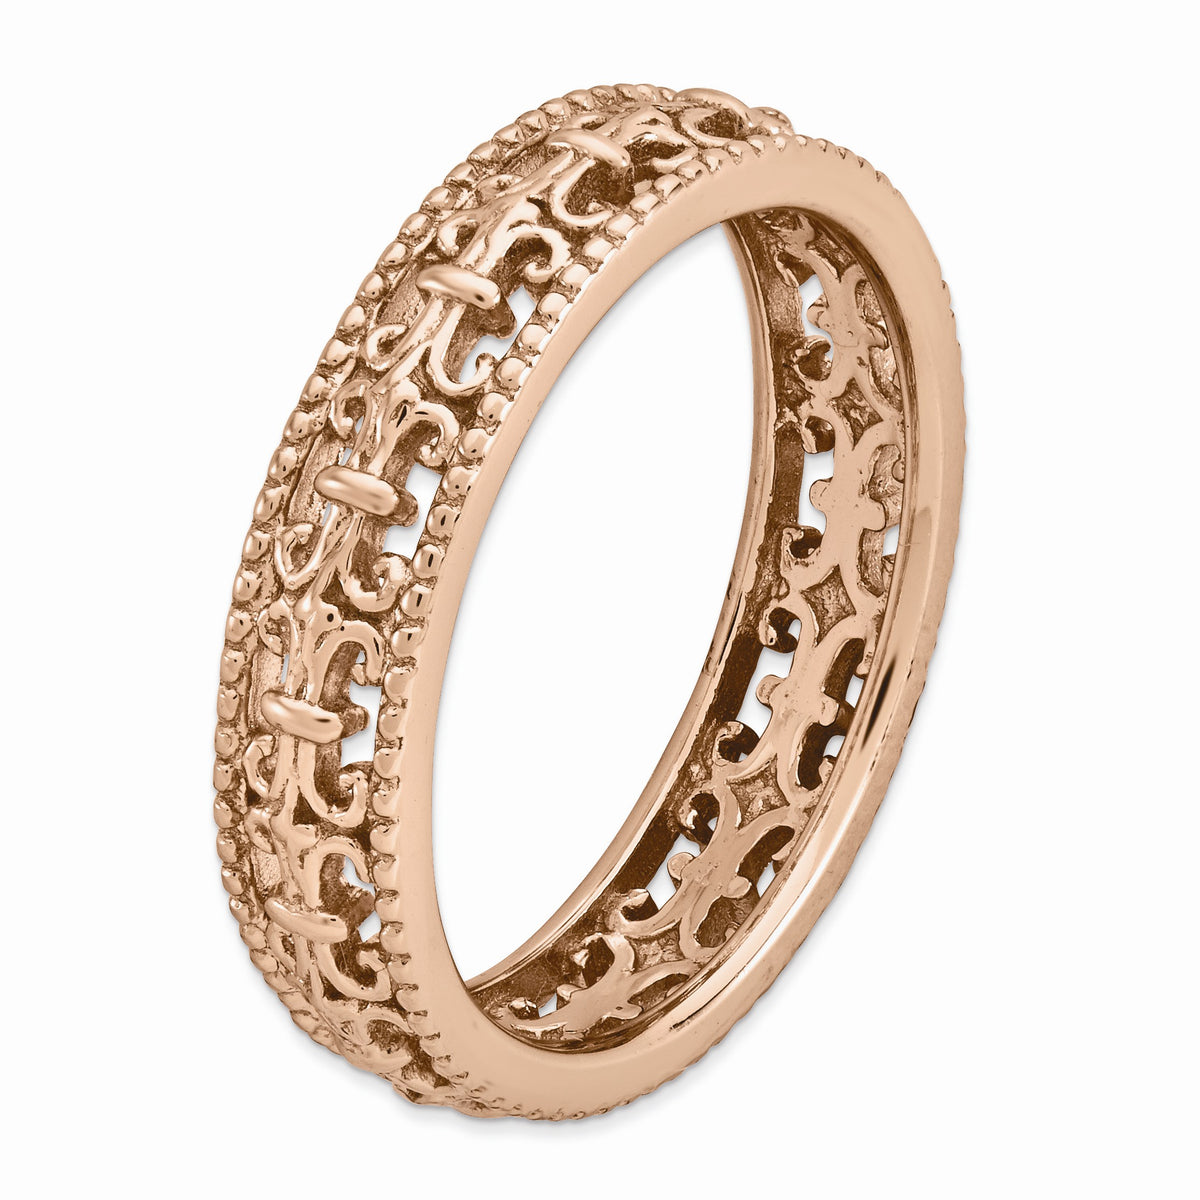 Alternate view of the 4.5mm Rose Gold Tone Plated Sterling Silver Fleur de Lis Stack Band by The Black Bow Jewelry Co.